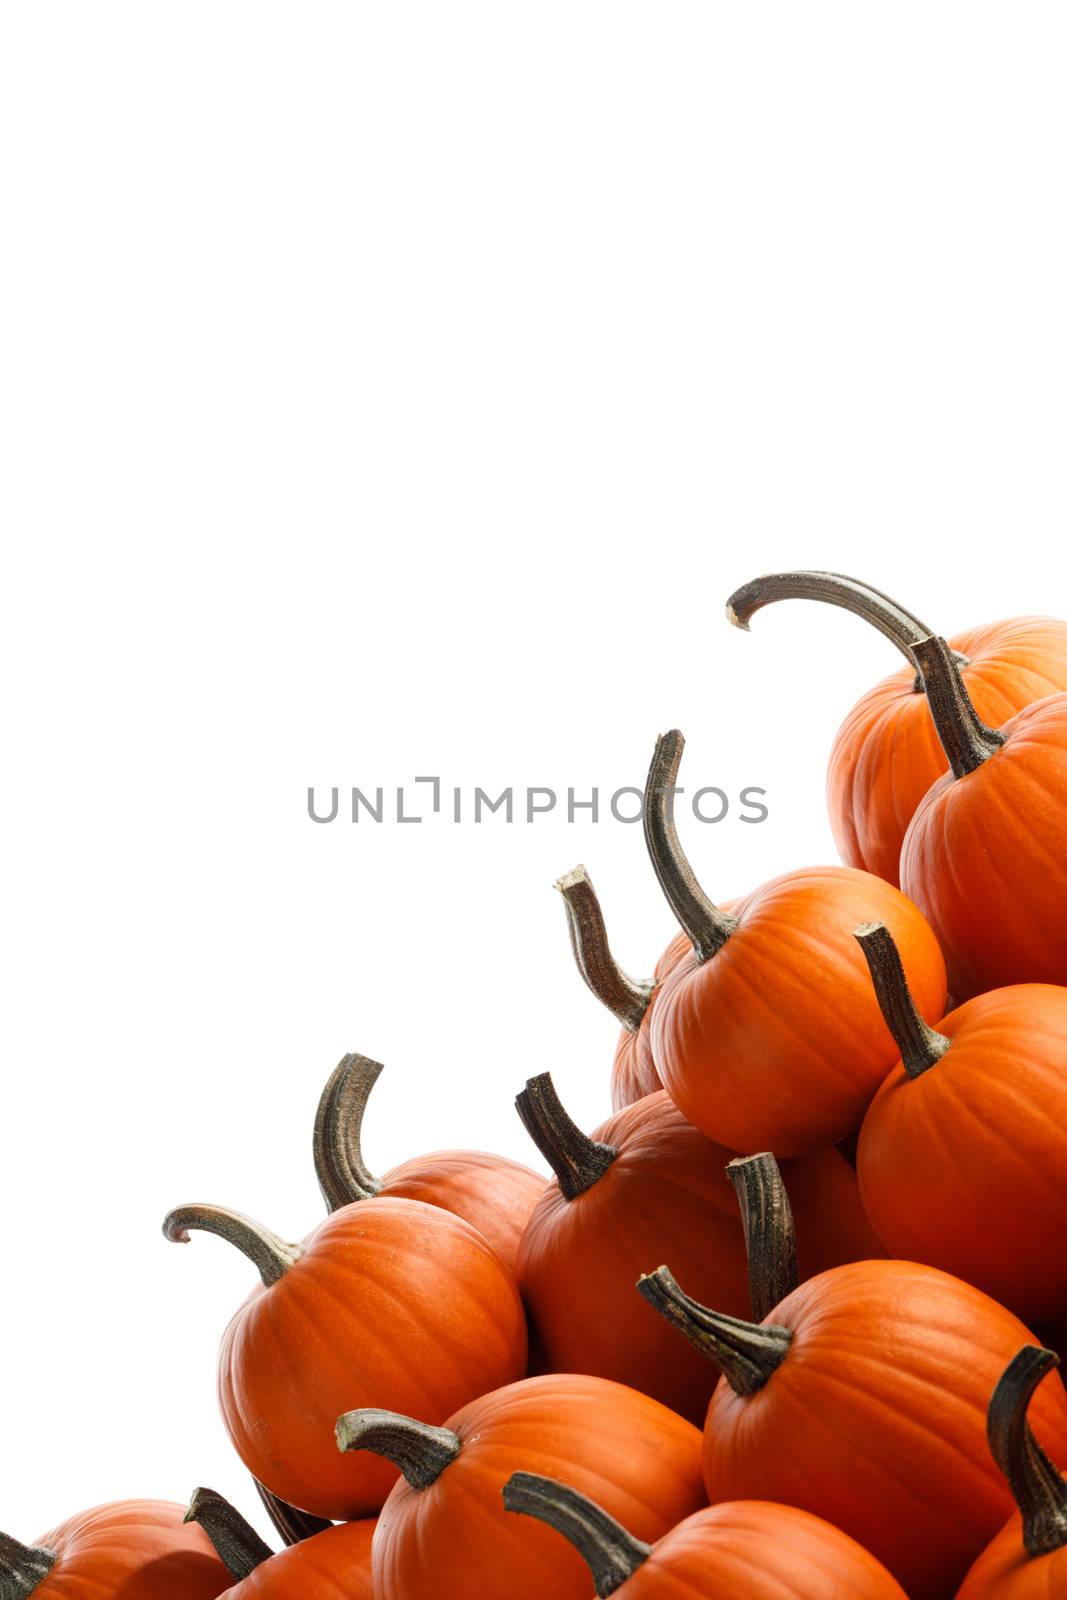 Many orange pumpkins isolated on white background, Halloween concept